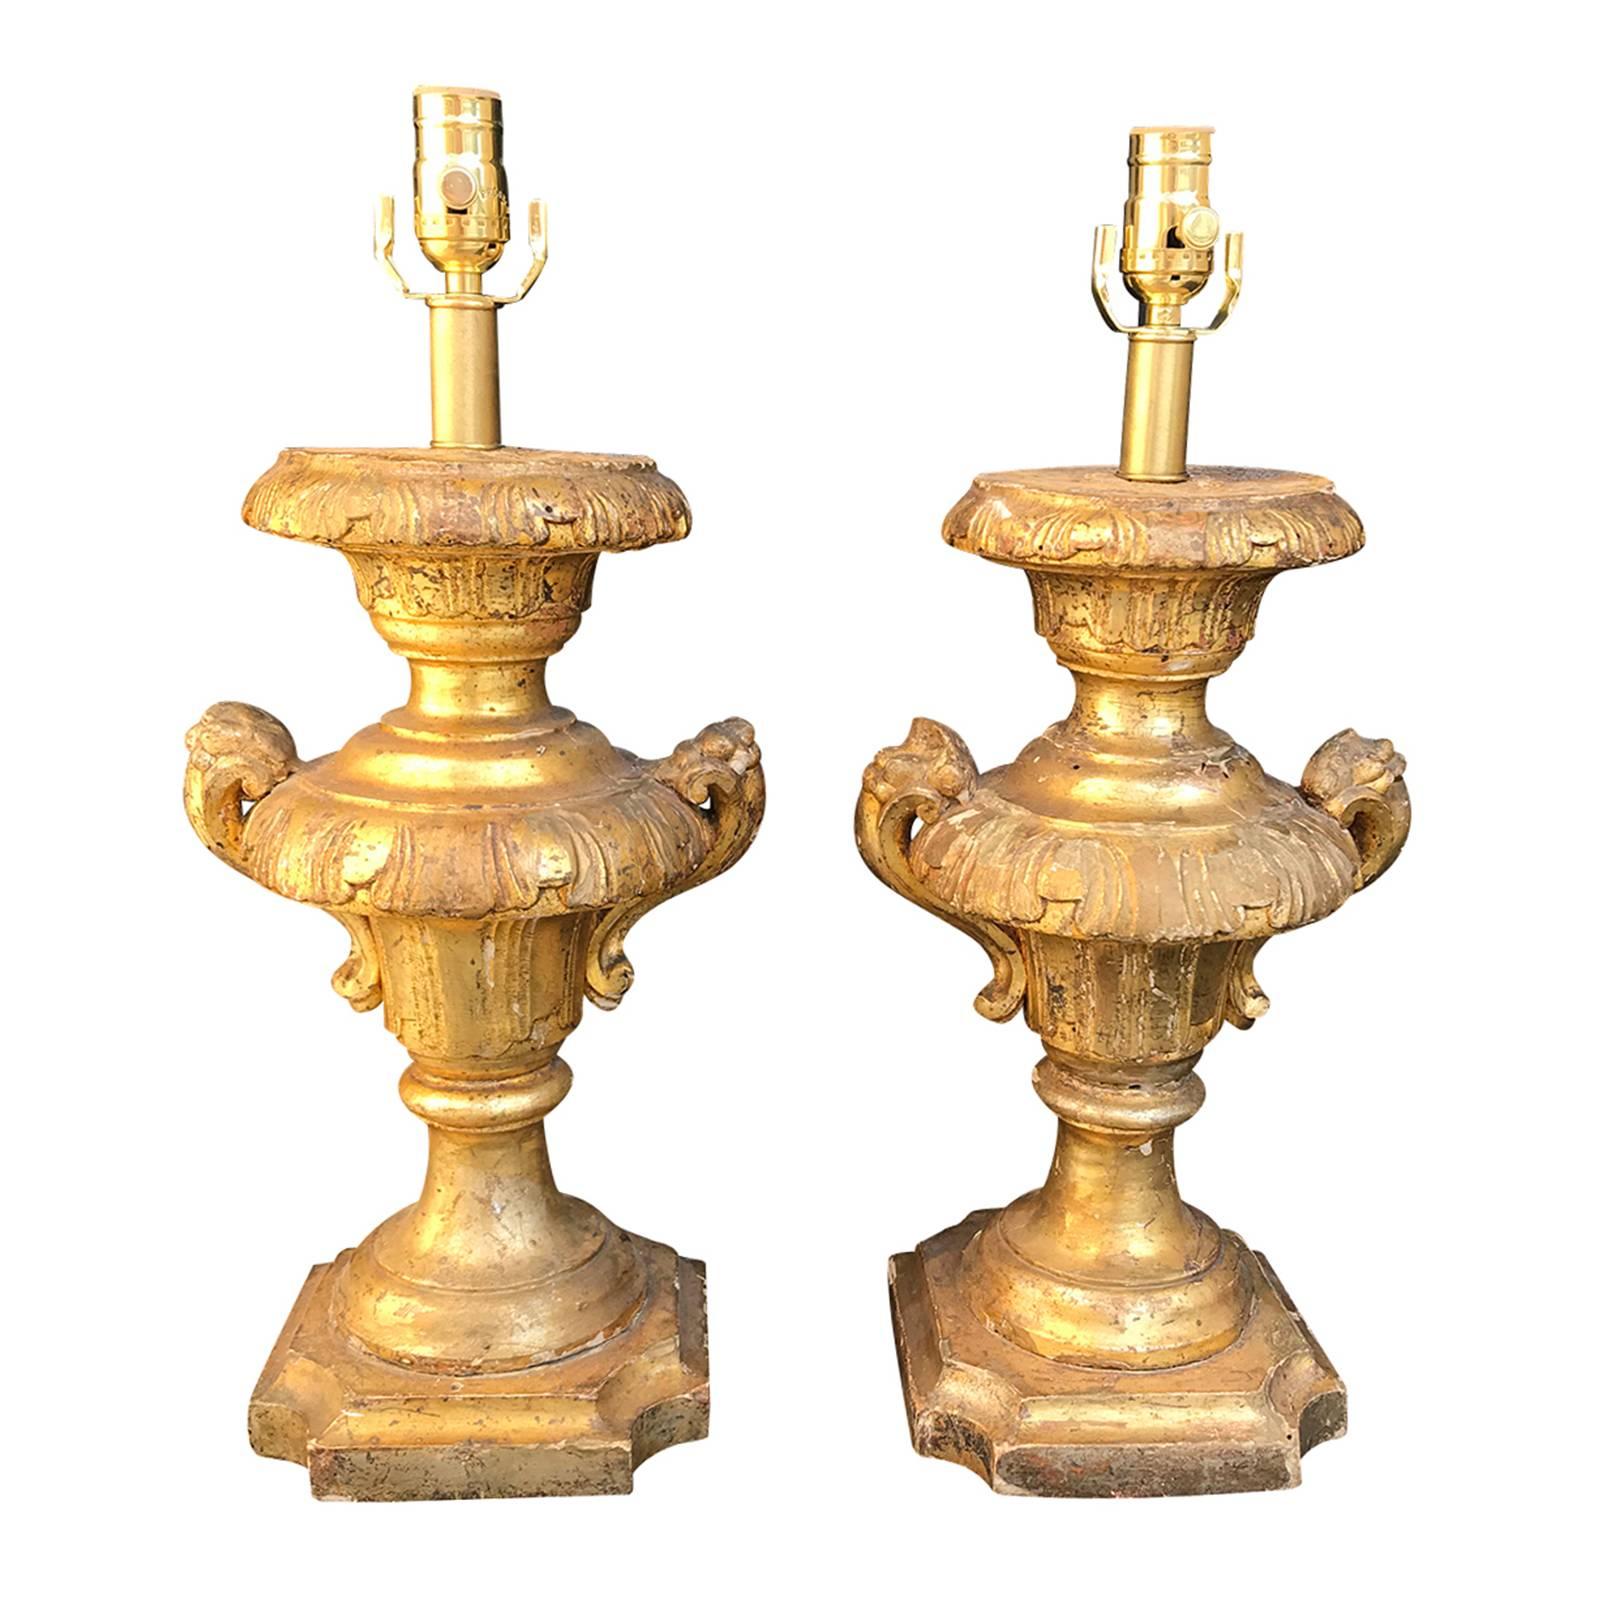 18th-19th Century Pair of Giltwood Lamps, Carved